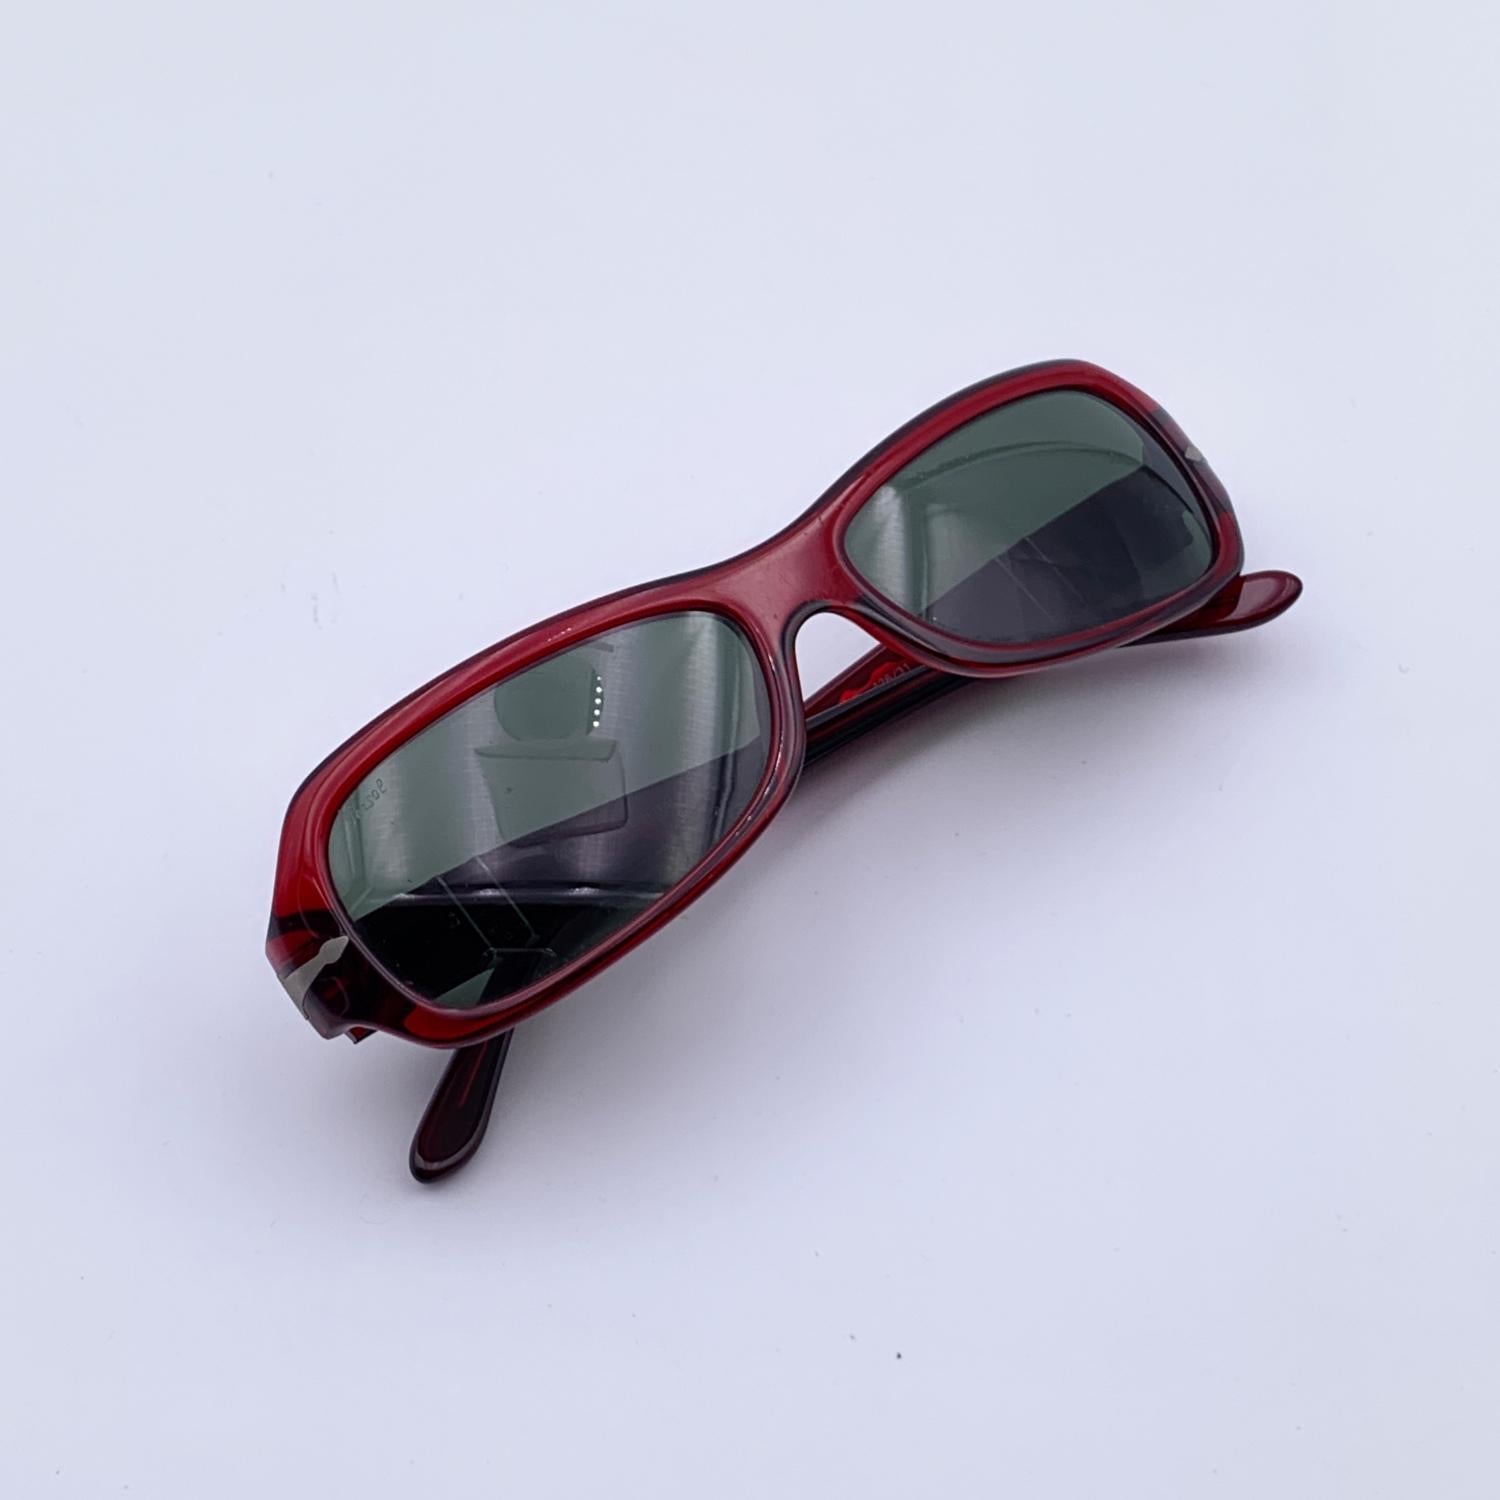 Legendary PERSOL RATTI Vintage Rectangle Sunglasses - Mod. 2807-S - 135 - 56/15 - 126/31. Red acetate frame. Grey original Persol lenses- 100% UV protection- Flexible temple (thanks to MEFLECTO System). Made in Italy

Details

MATERIAL: